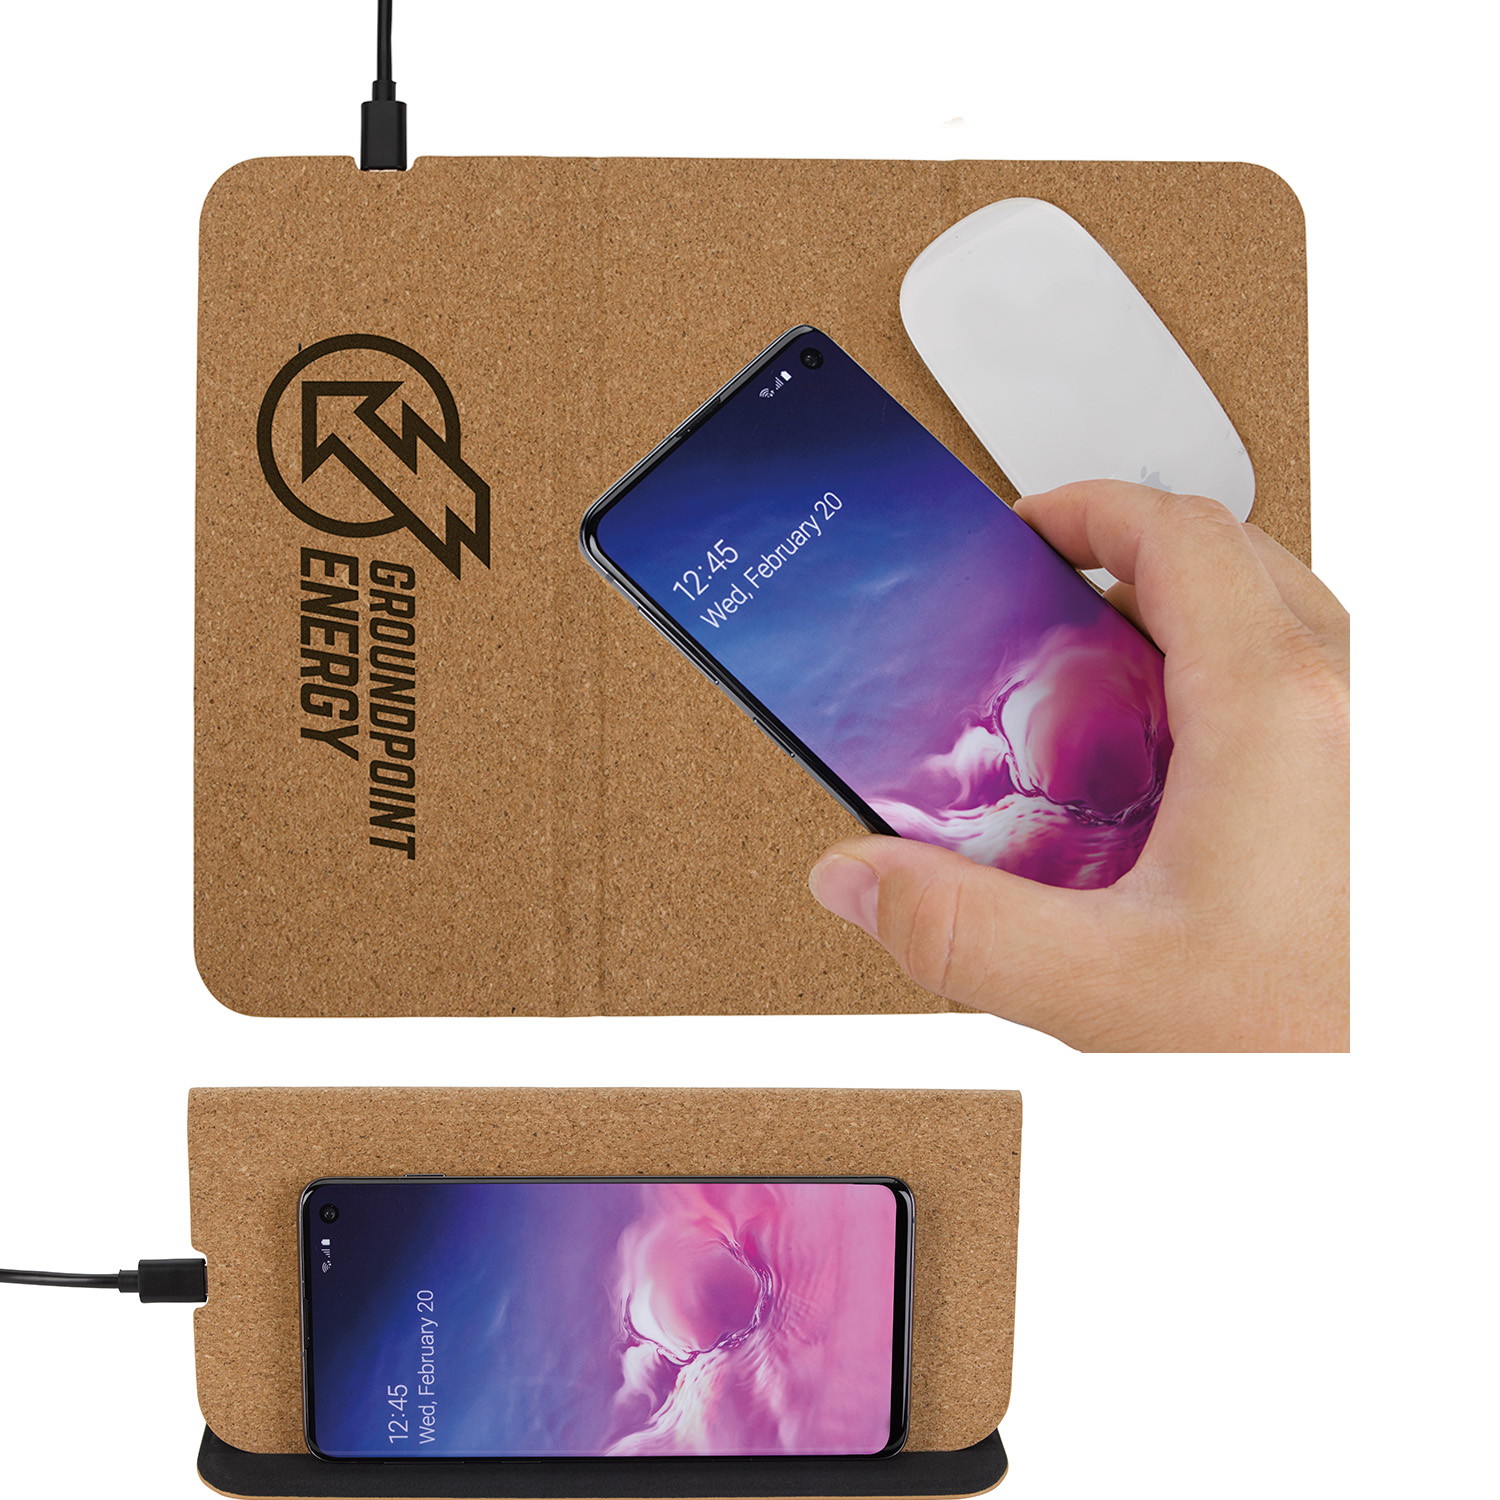 Cork Mousepad & Phone Stand with Wireless Charger